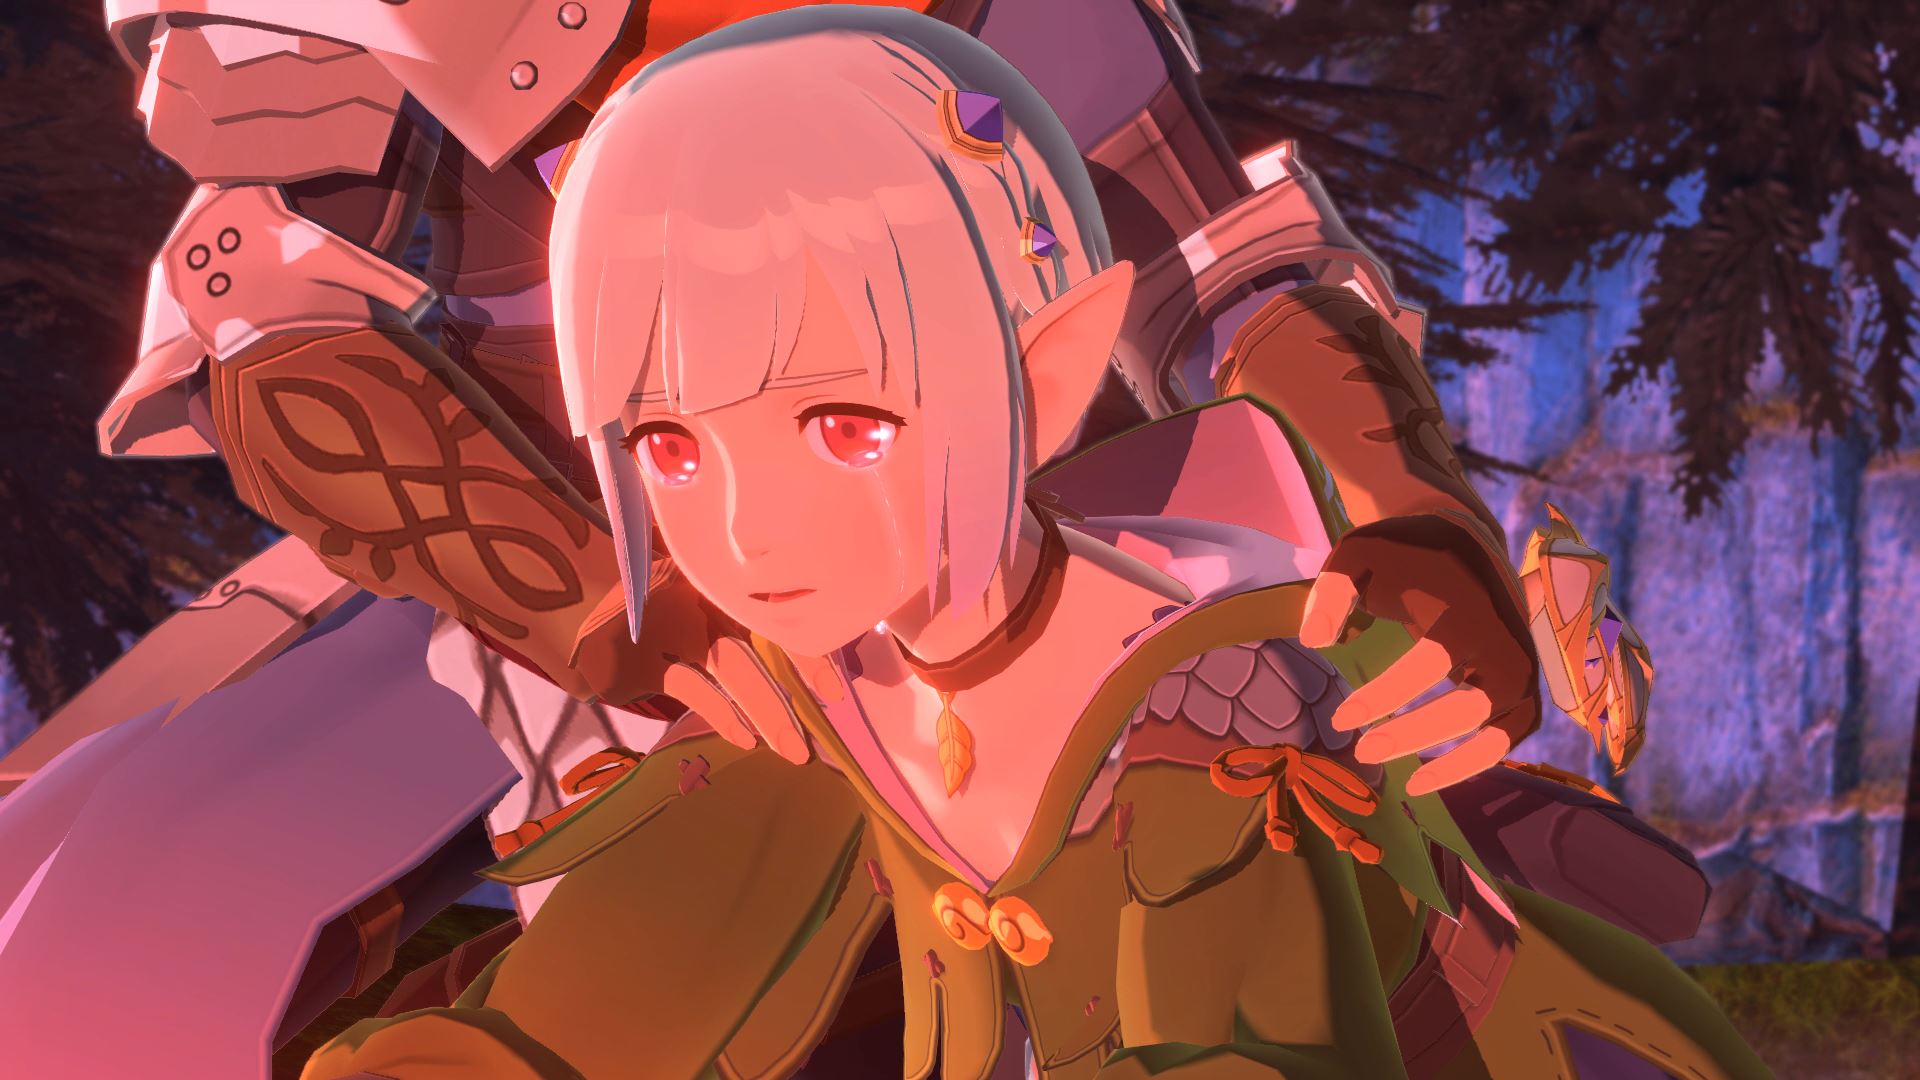 Ena, an elven girl from Monster Hunter Stories 2, cries at the sight of something in the distance. A character holds her shoulders from behind, as a show of support.